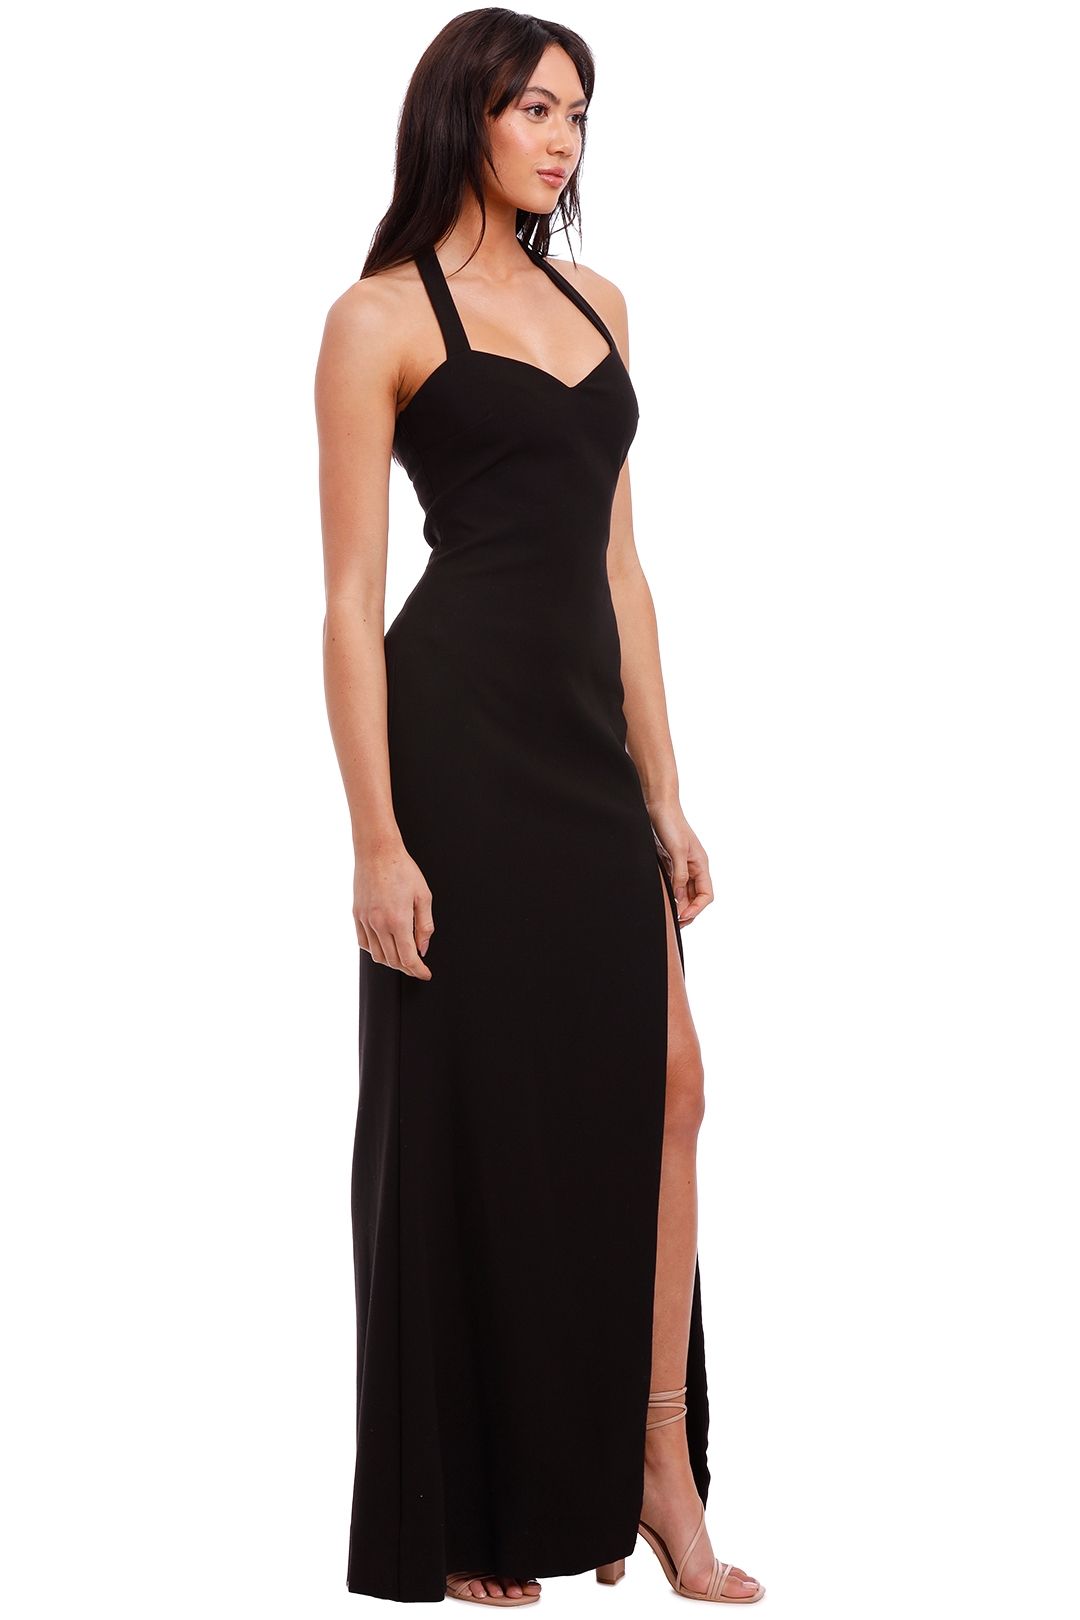 Claire Gown by Likely NYC for Rent | GlamCorner